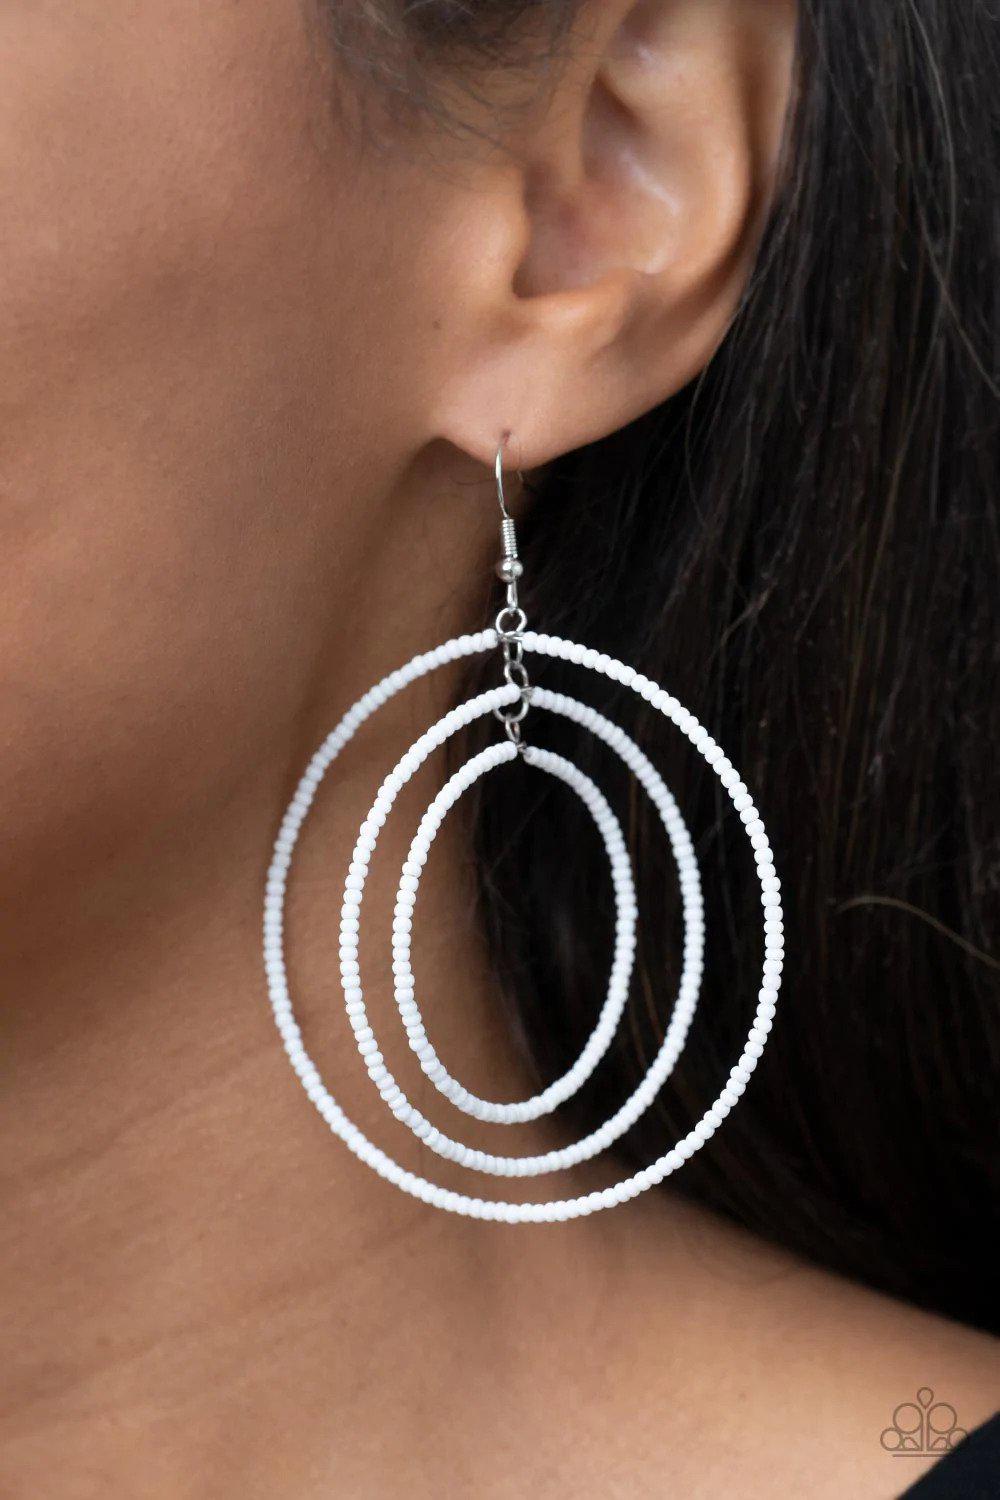 Colorfully Circulating White Earrings - Paparazzi Accessories- on model - CarasShop.com - $5 Jewelry by Cara Jewels